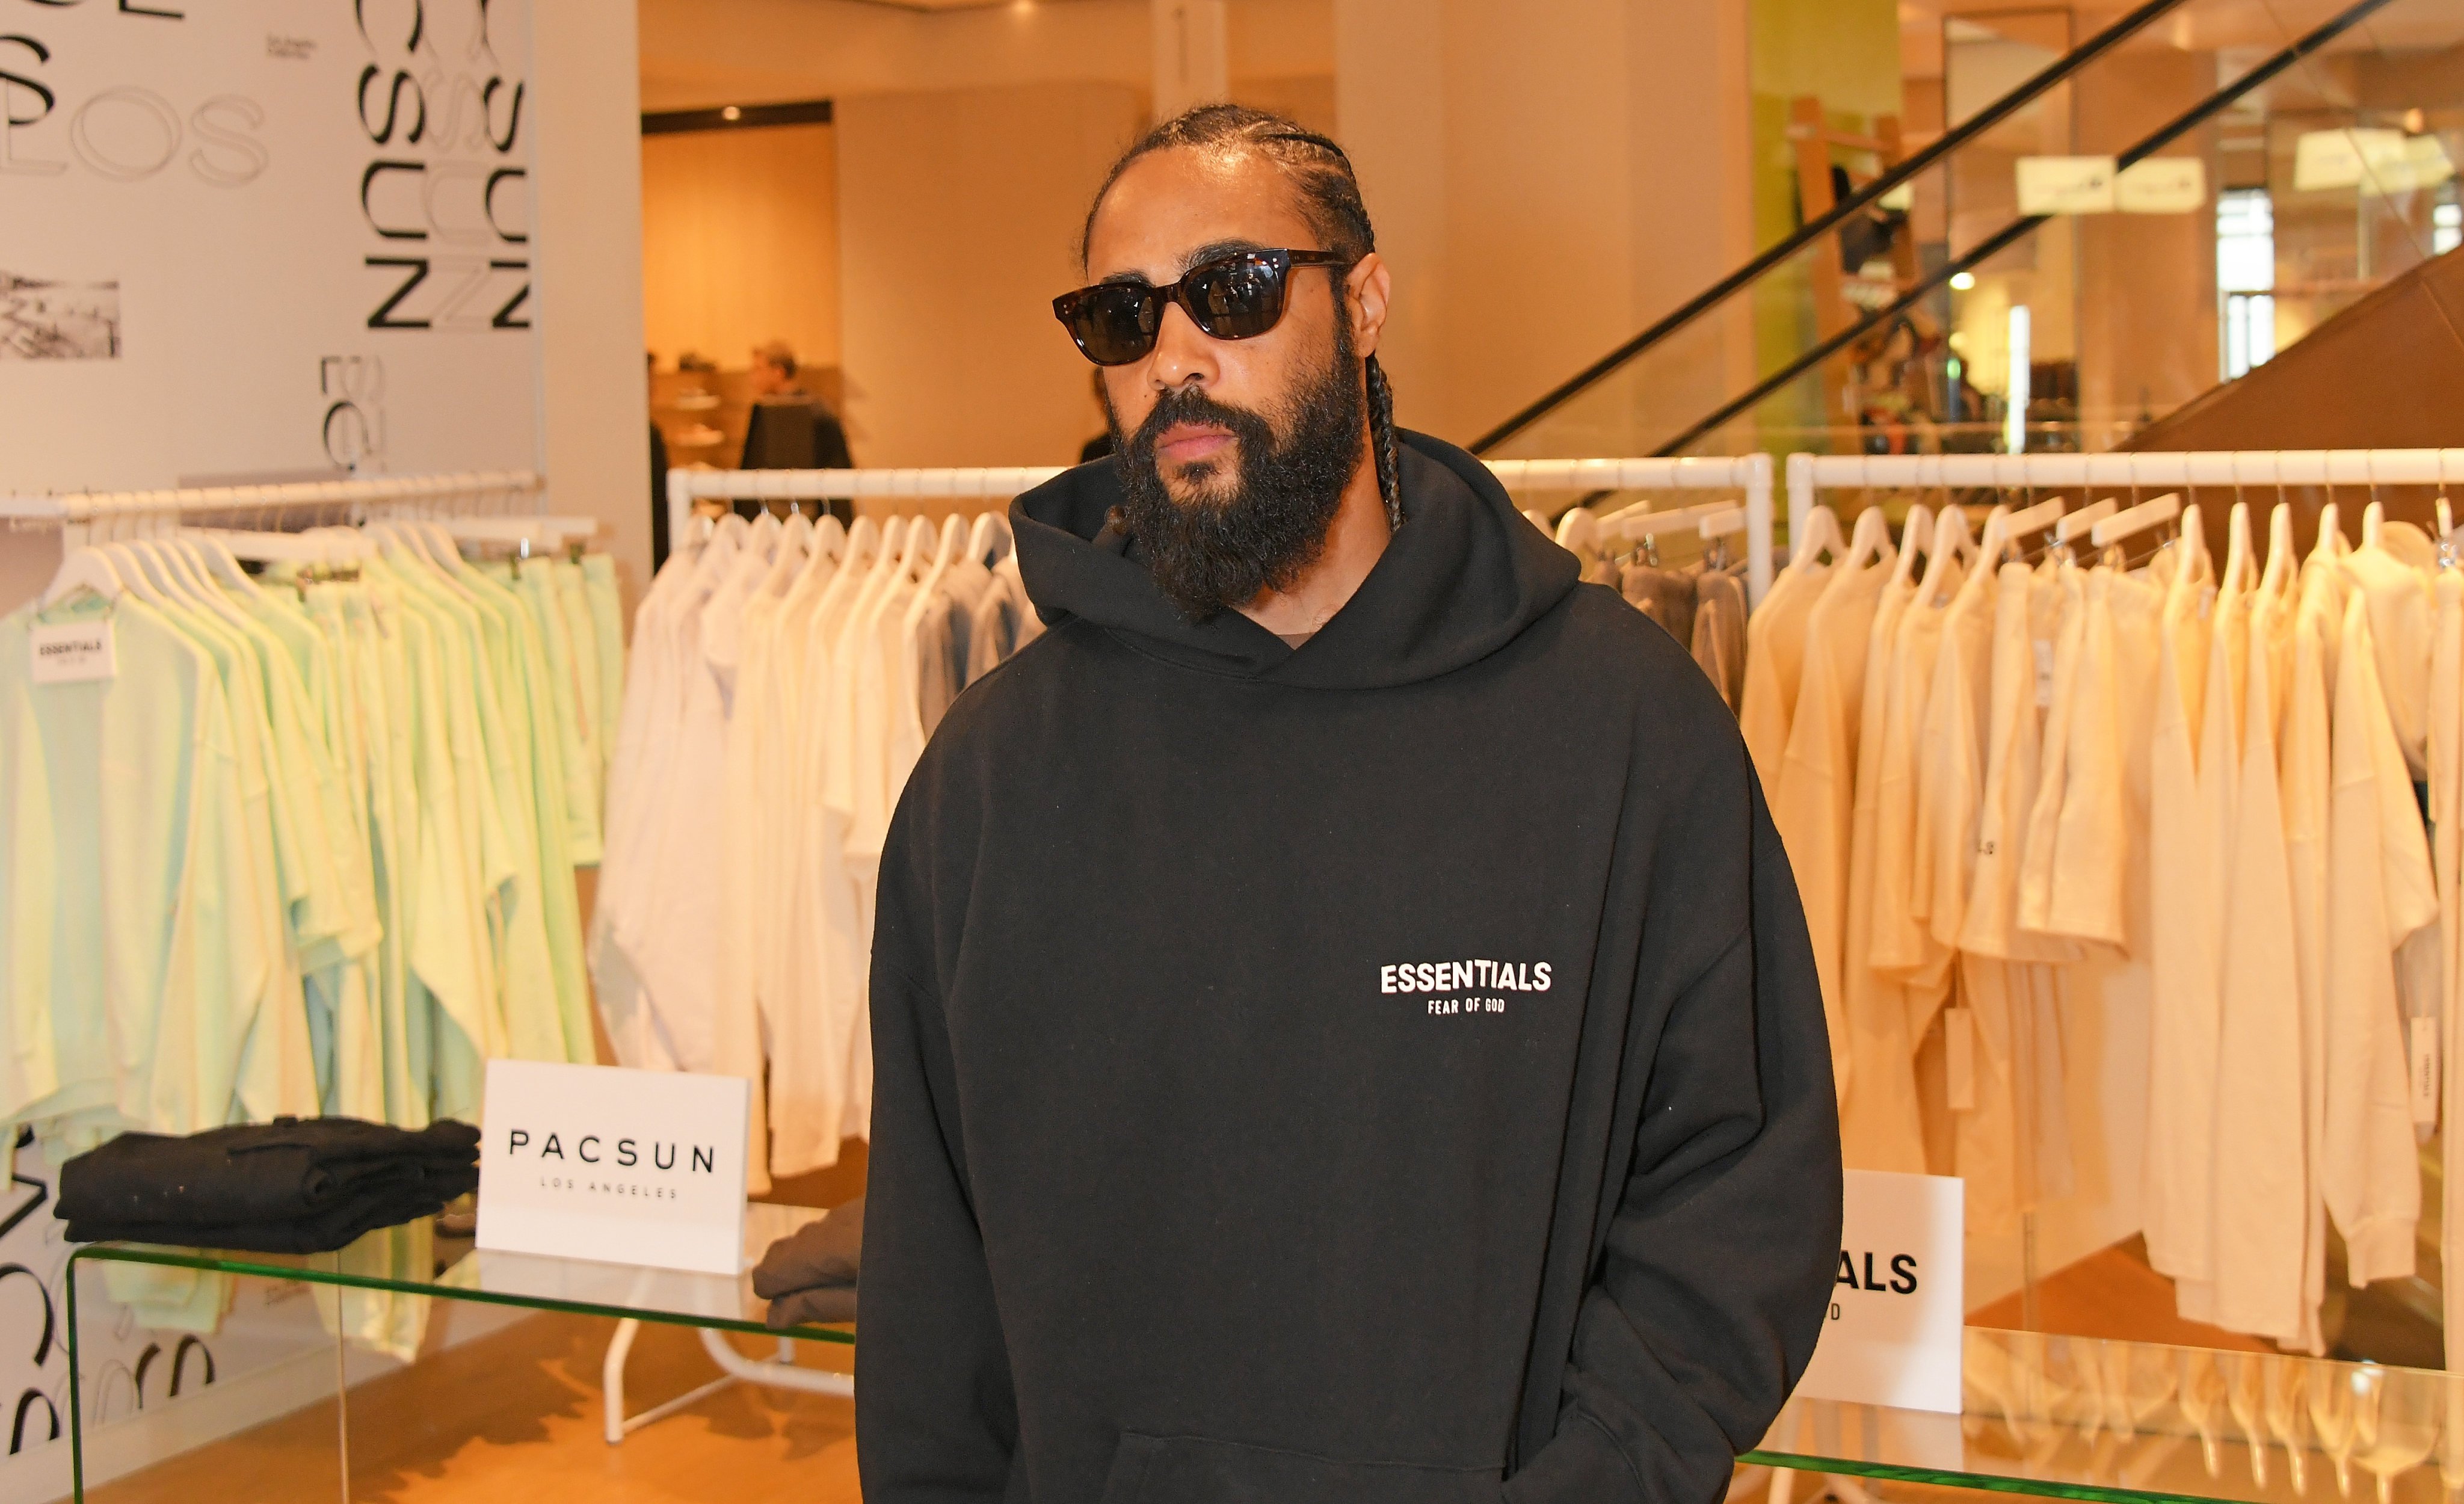  America hasn’t produced many luxury companies lately but Fear of God founder Jerry Lorenzo’s approach – building the main brand and a streetwear label Essentials side-by-side, and ignoring much of the accepted playbook – is bringing big results. Photo: Getty Images